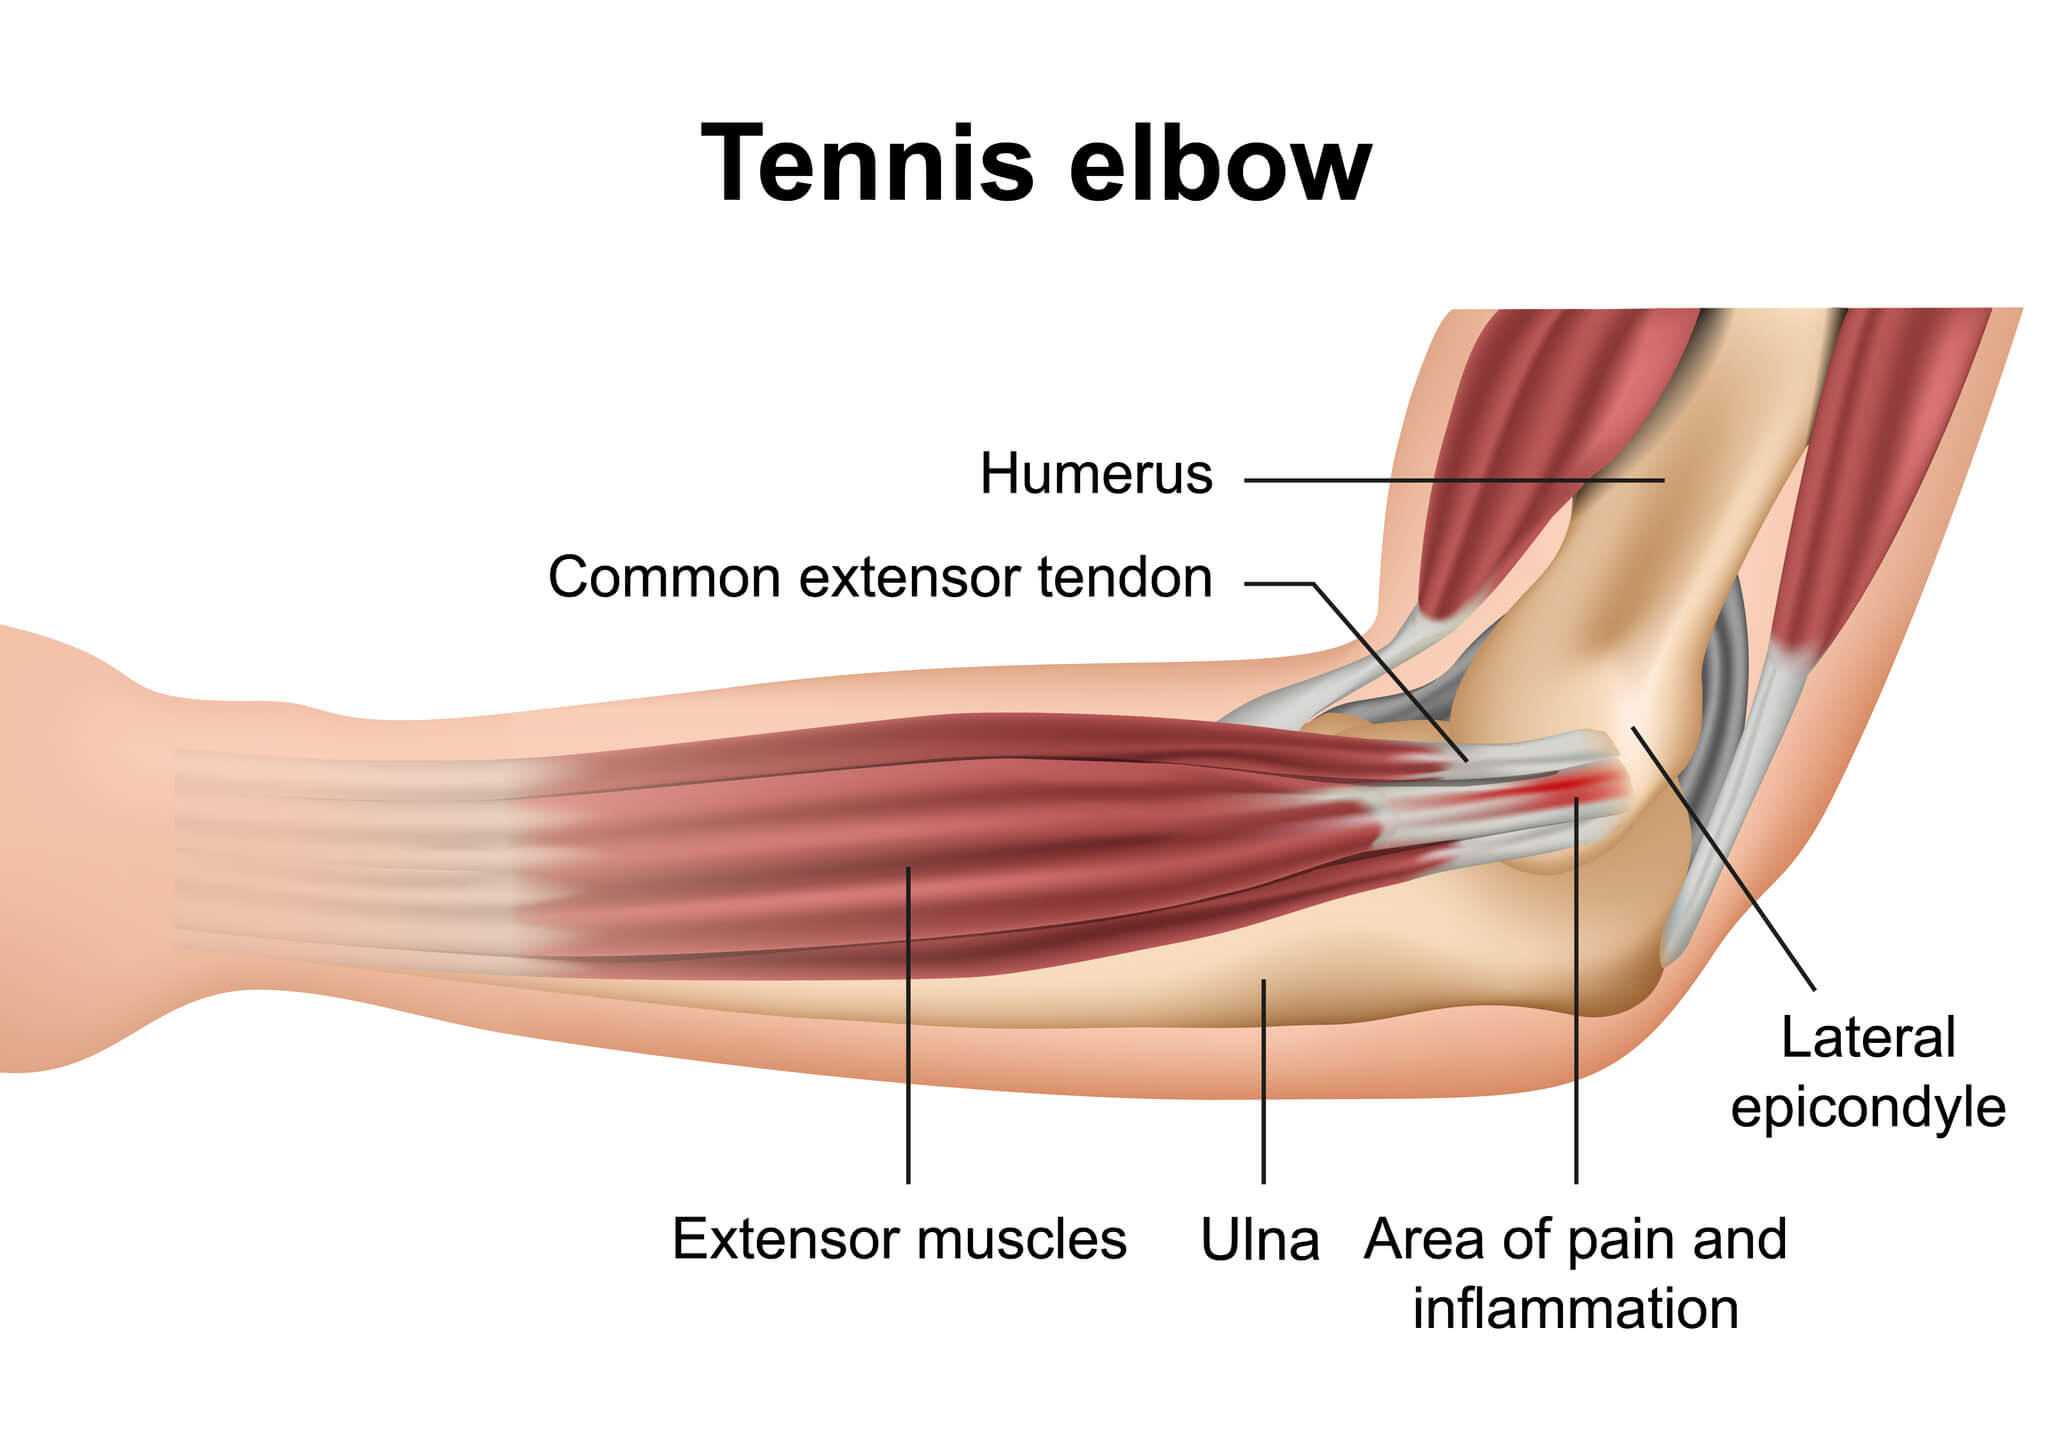 Image of an elbow affected by tennis elbow